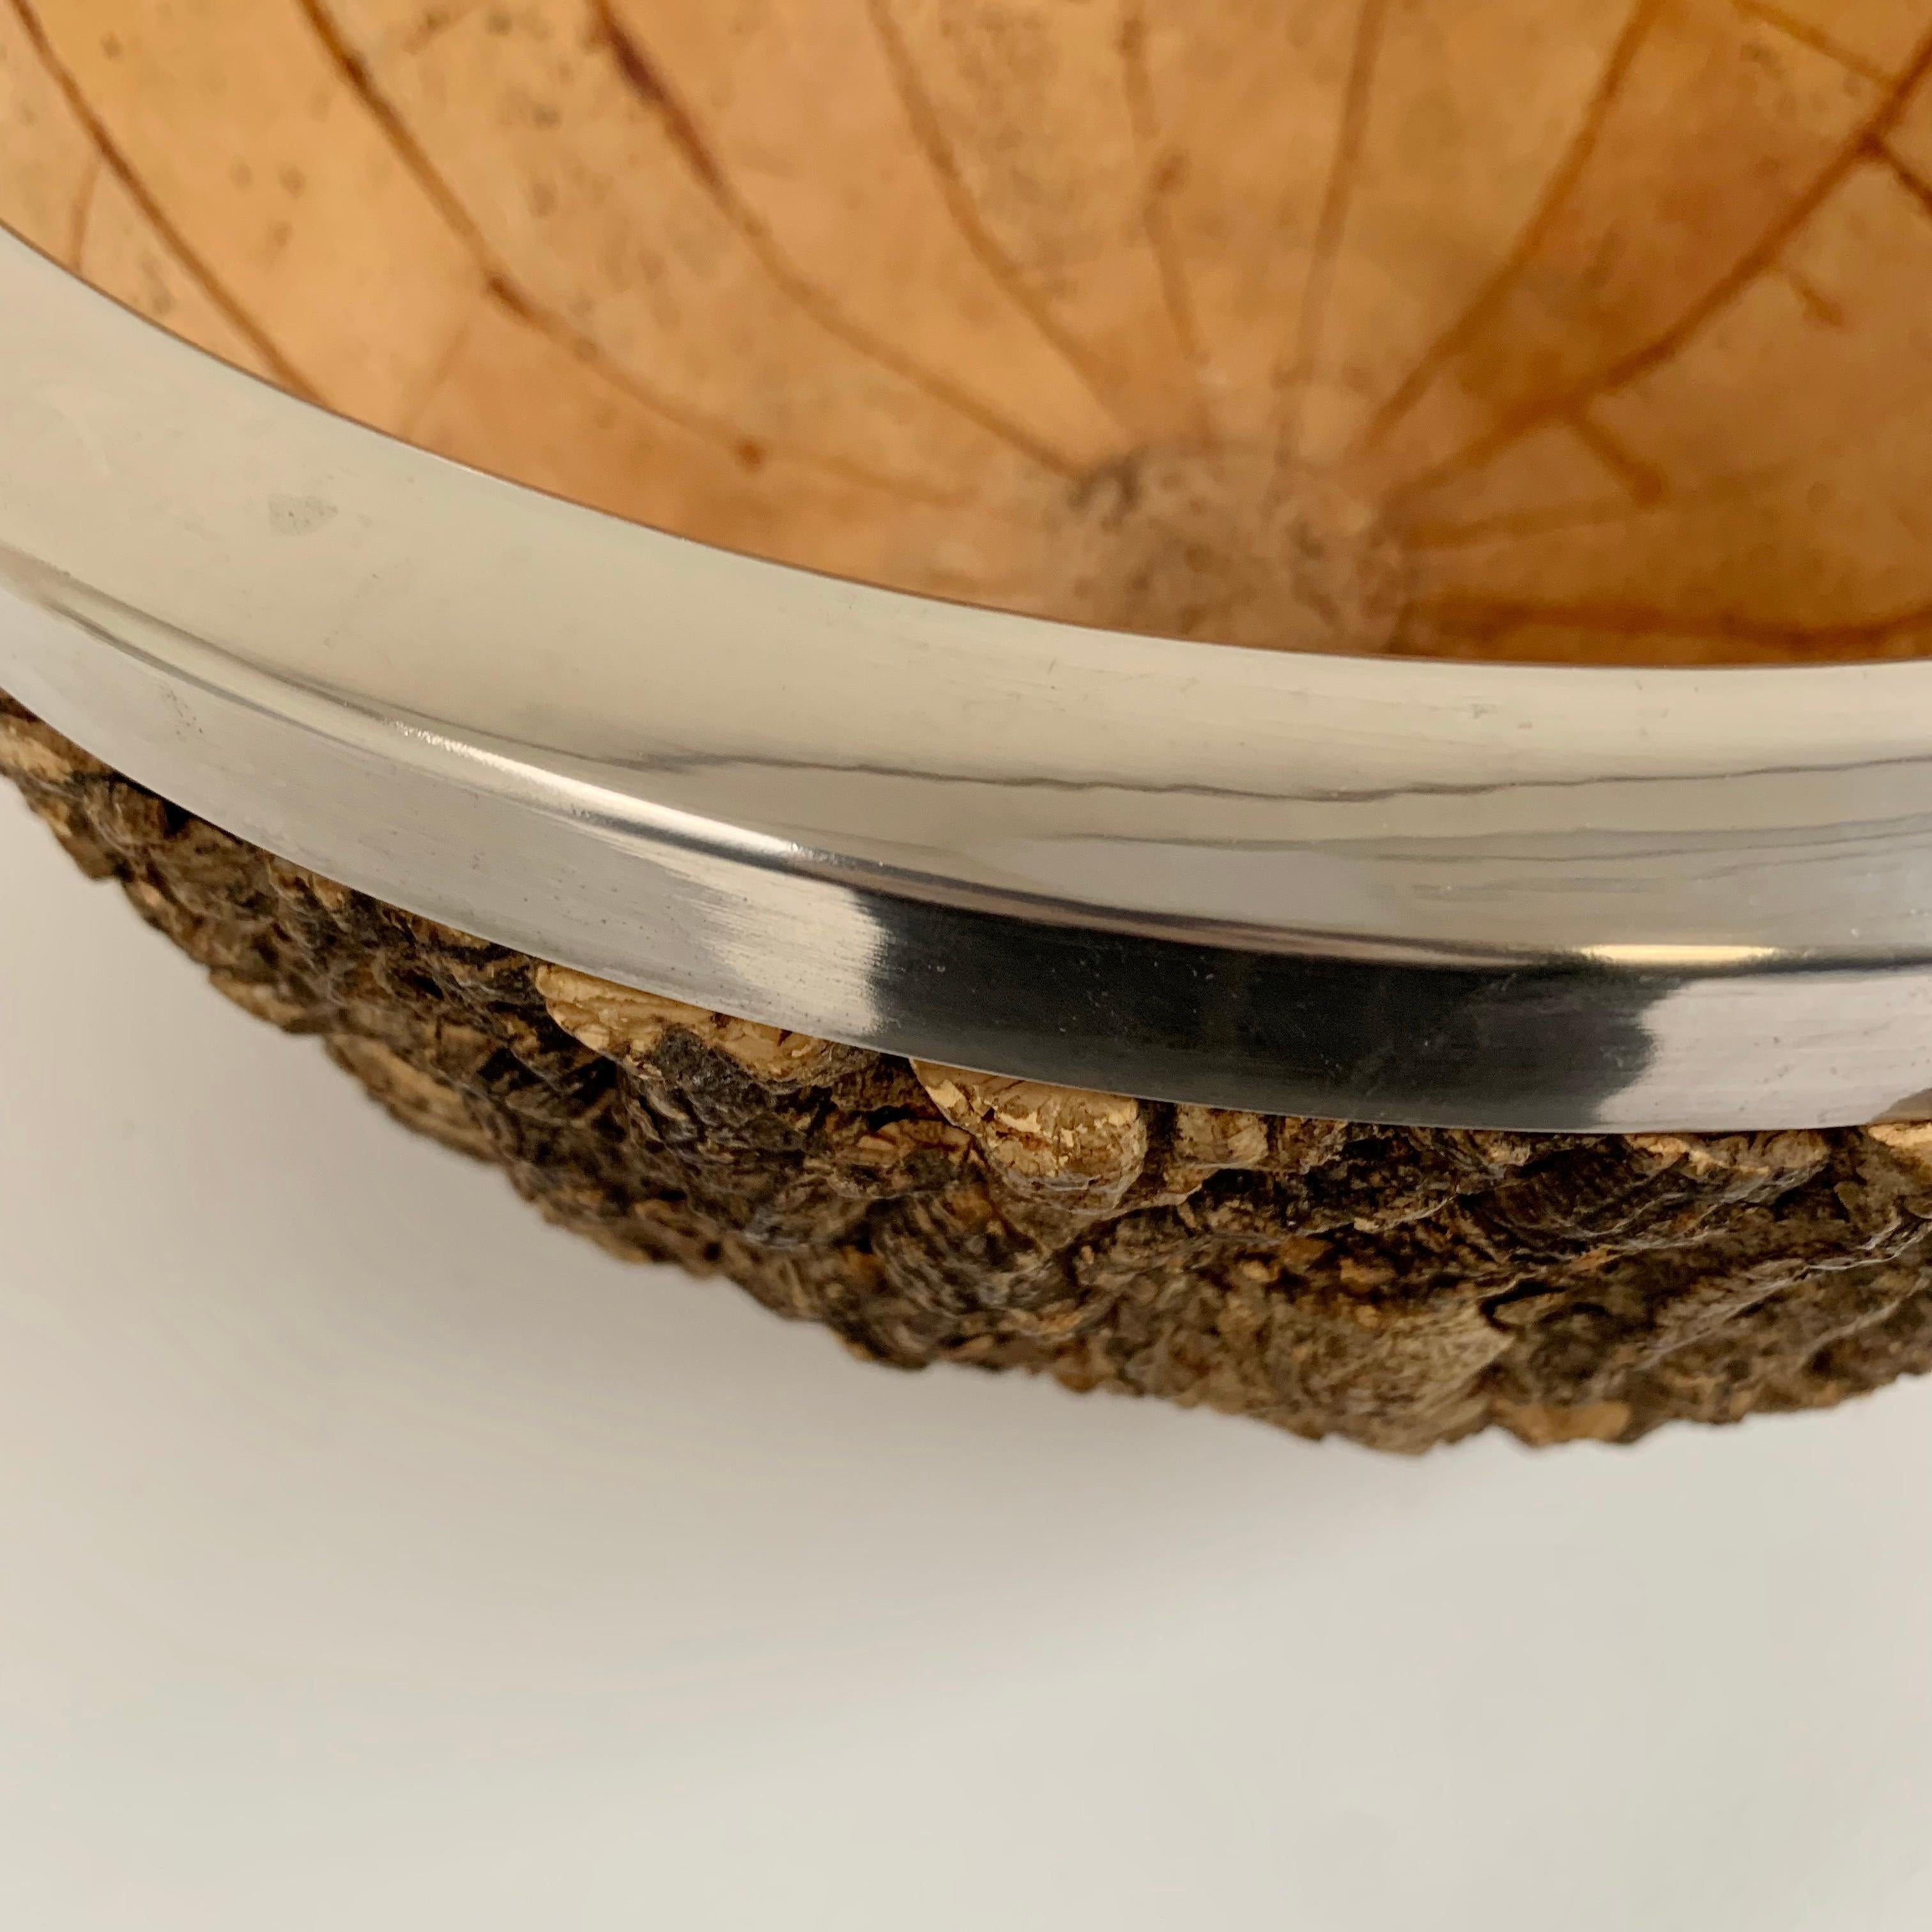 Gabrielle Crespi Signed Large Cork Bowl, circa 1974, Italy. For Sale 8